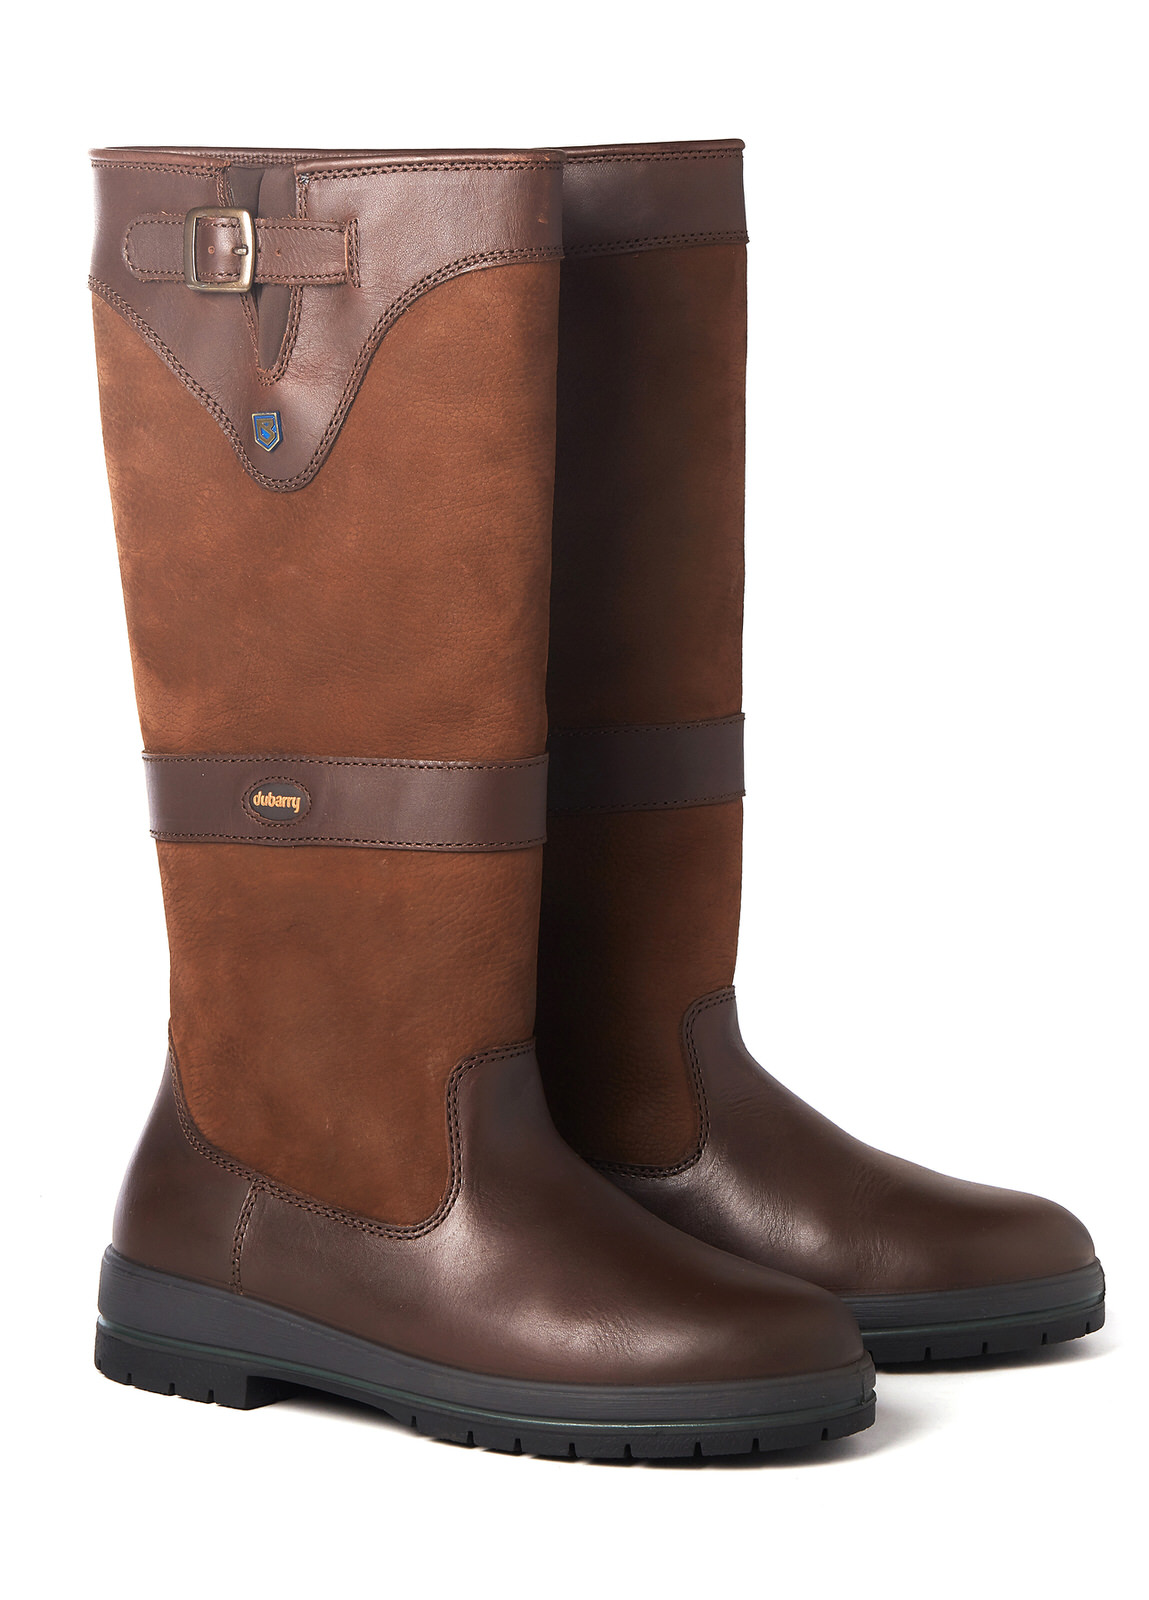 Tipperary Country Boot | Dubarry of Ireland